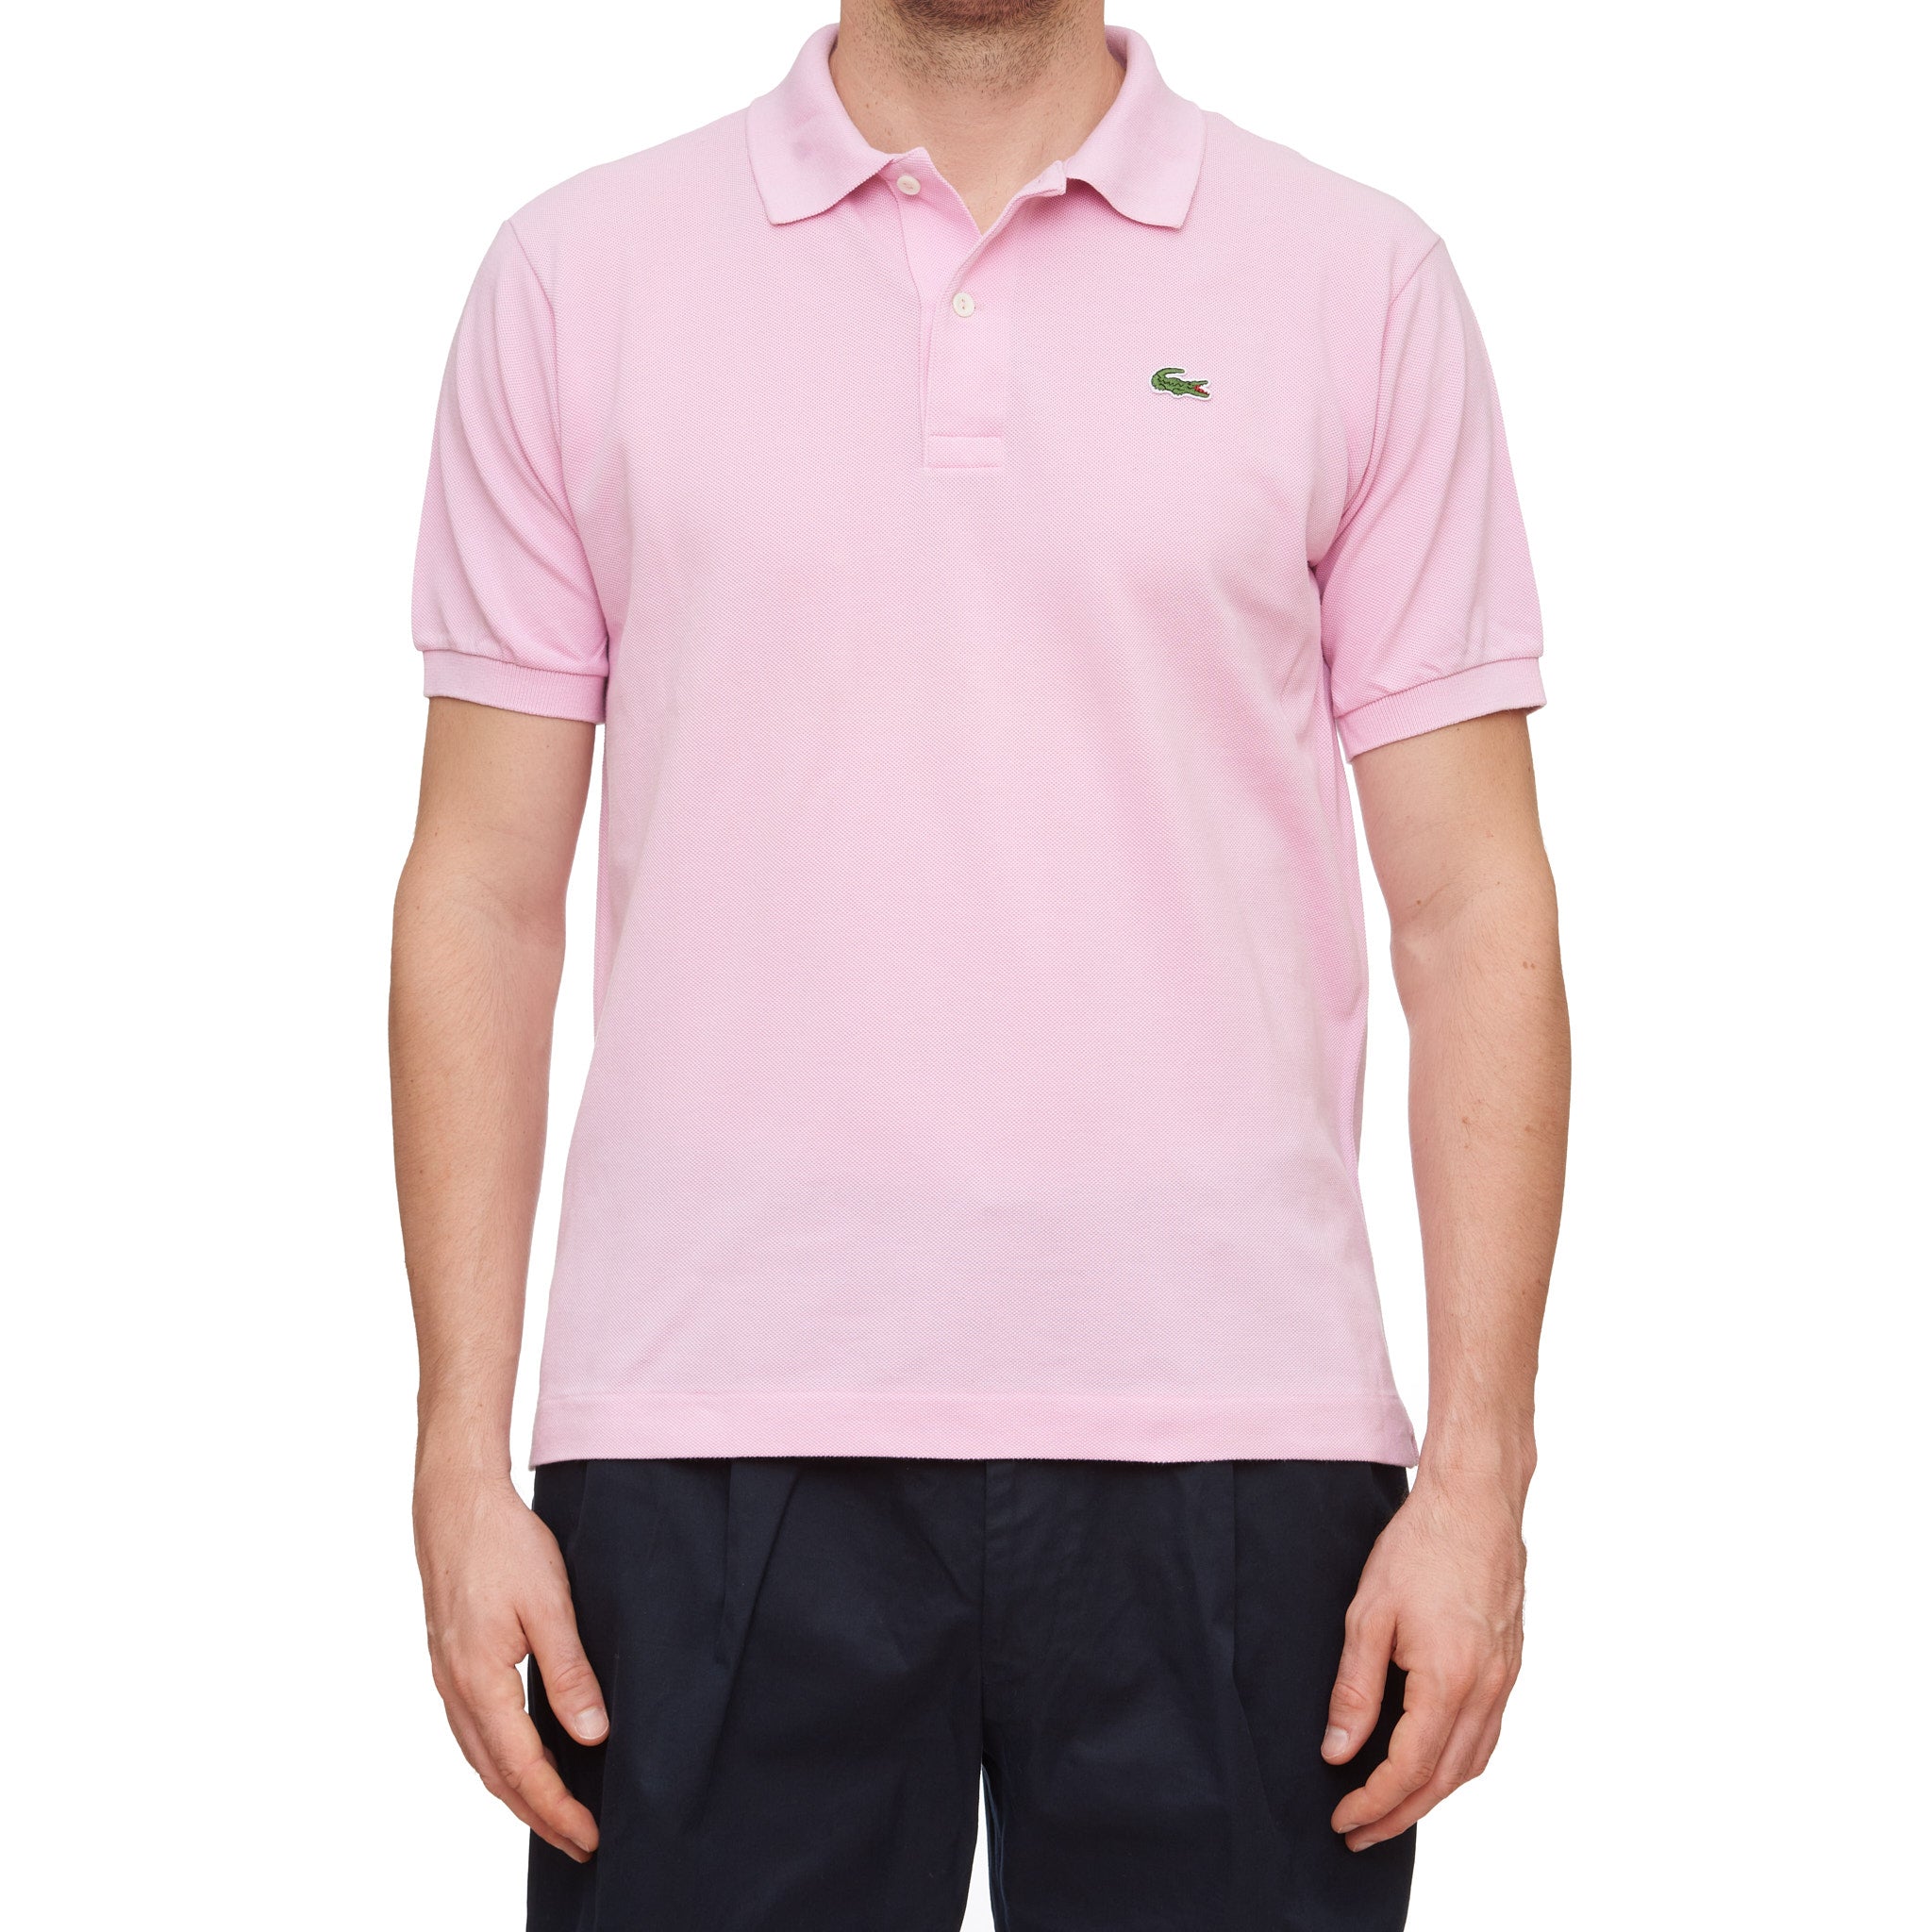 LACOSTE F5191 Devanlay Pink Pique Cotton Short Sleeve Polo FR 4 US M LACOSTE